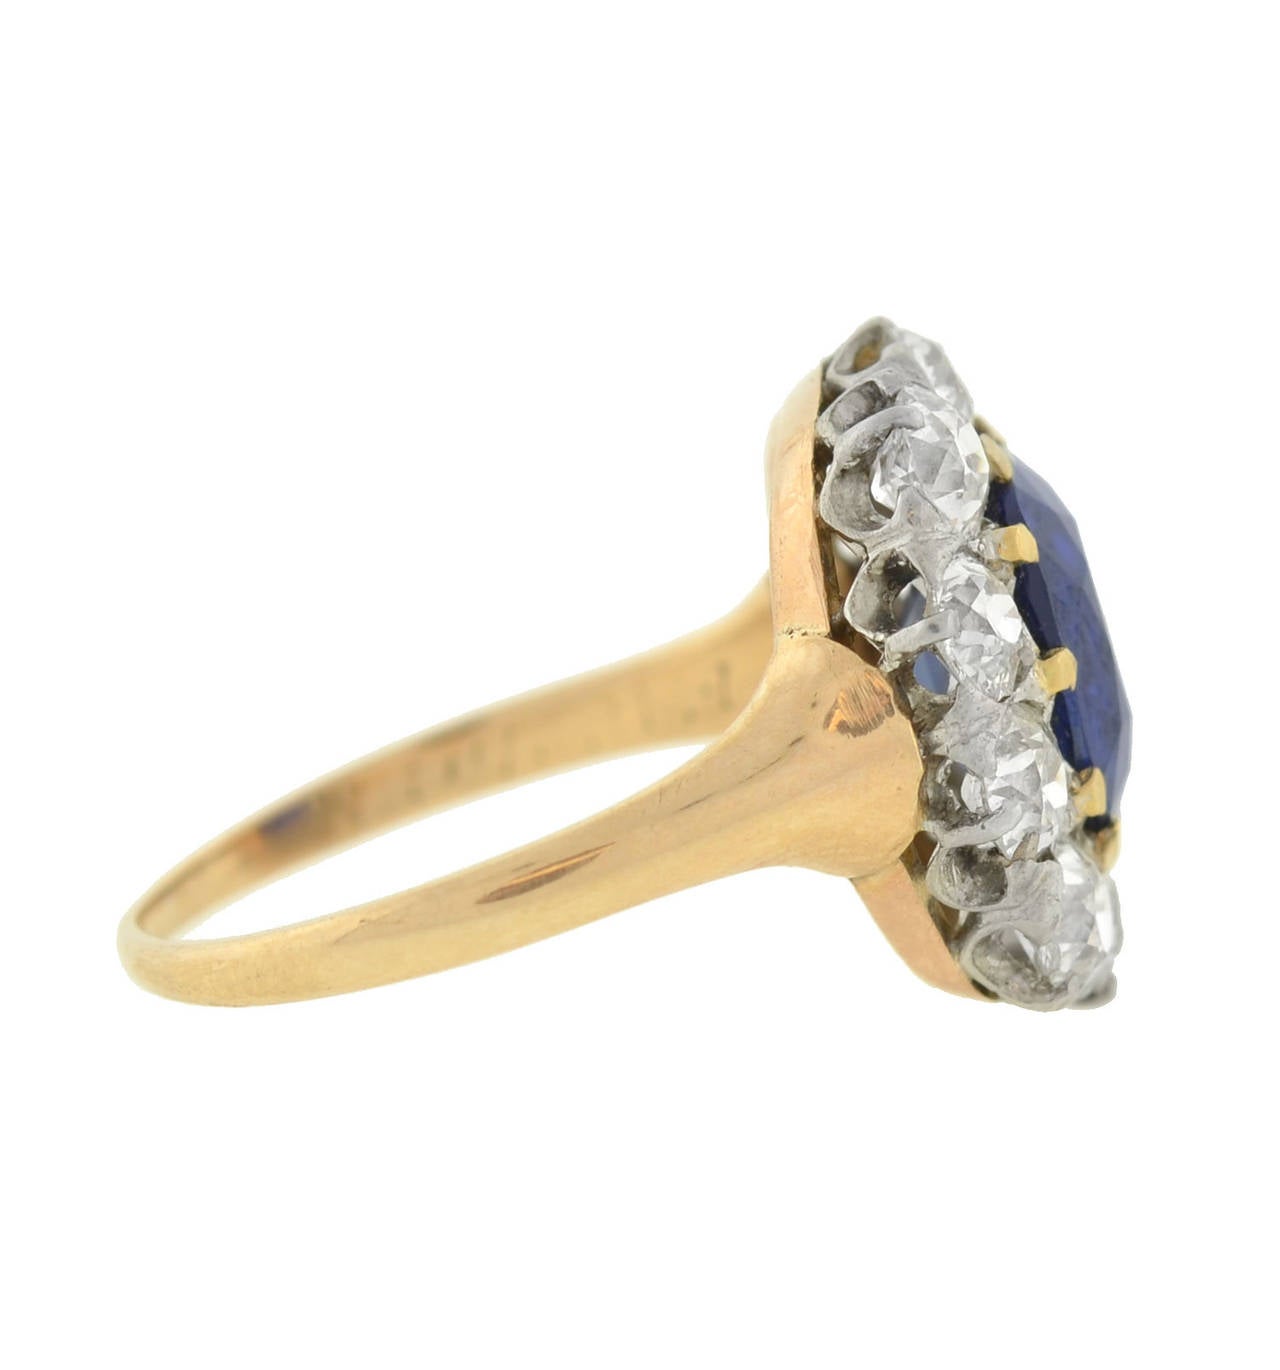 An absolutely breathtaking sapphire and diamond ring from the Edwardian (ca1910) era! Made of platinum-topped 14kt yellow gold, this stunning ring features an exquisite 2.00ct unheated sapphire in the center, which has a vivid, deep blue color.